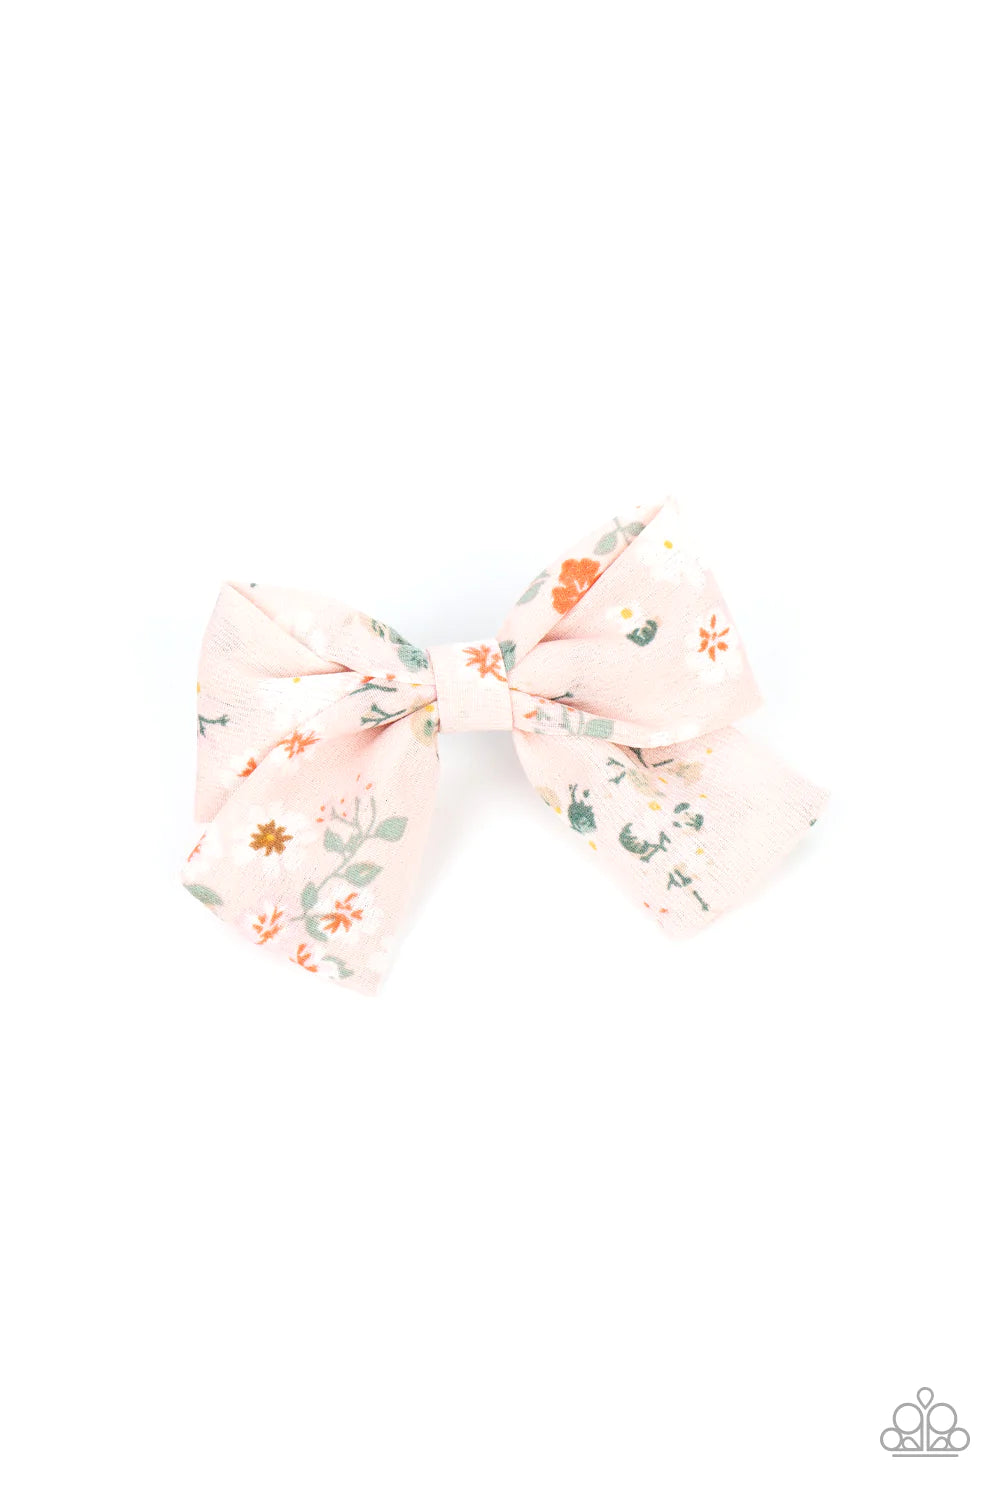 Paparazzi Accessories Wide Open Prairies - Pink Printed in a vintage inspired floral pattern, a ribbon of Gossamer Pink crepe-like fabric delicately knots into a colorful bow for a country inspired finish. Features a standard hair clip on the back. Sold a